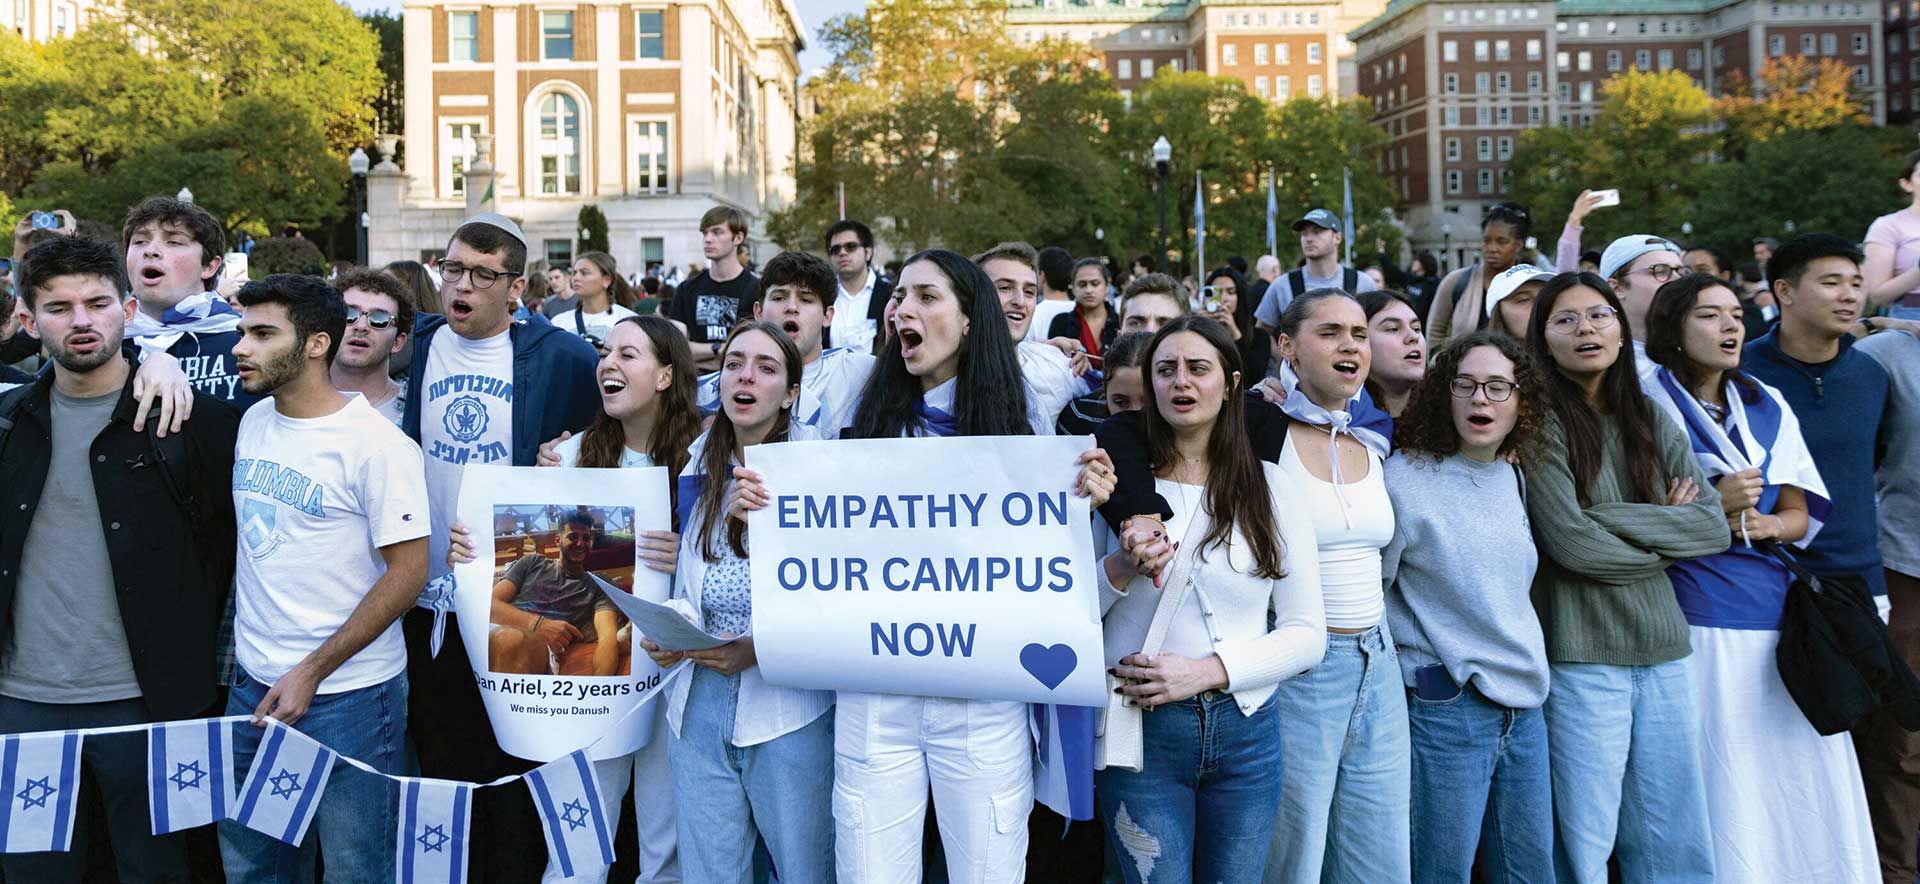 Pro-Israel demonstrators at a Columbia University, one holds a sign that says EMPATHY ON OUR CAMPUS NOW